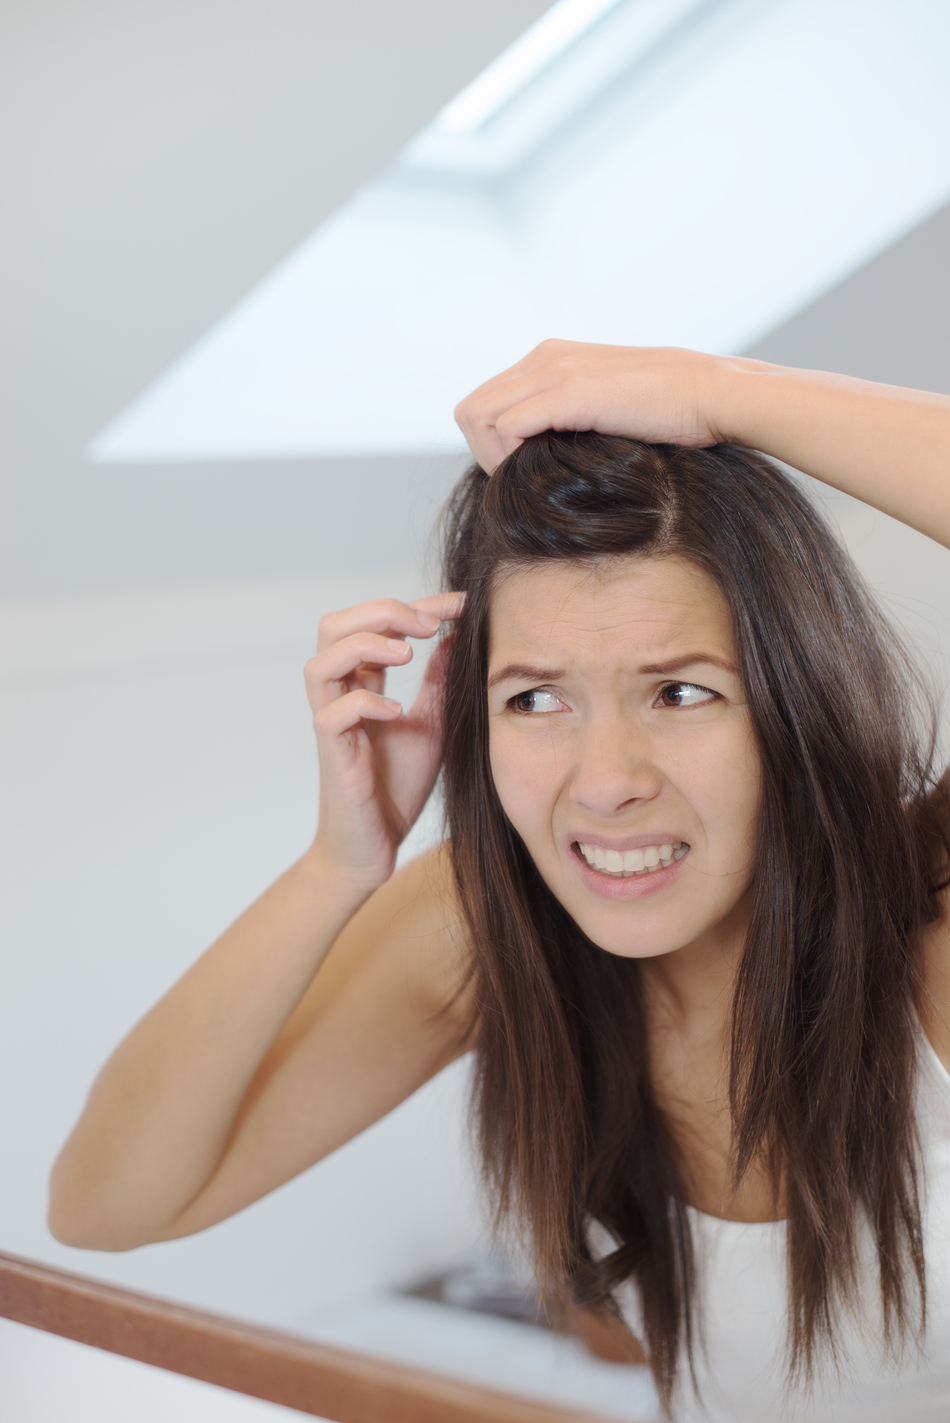 Finding Gray Hairs in My 20s – Am I Normal?